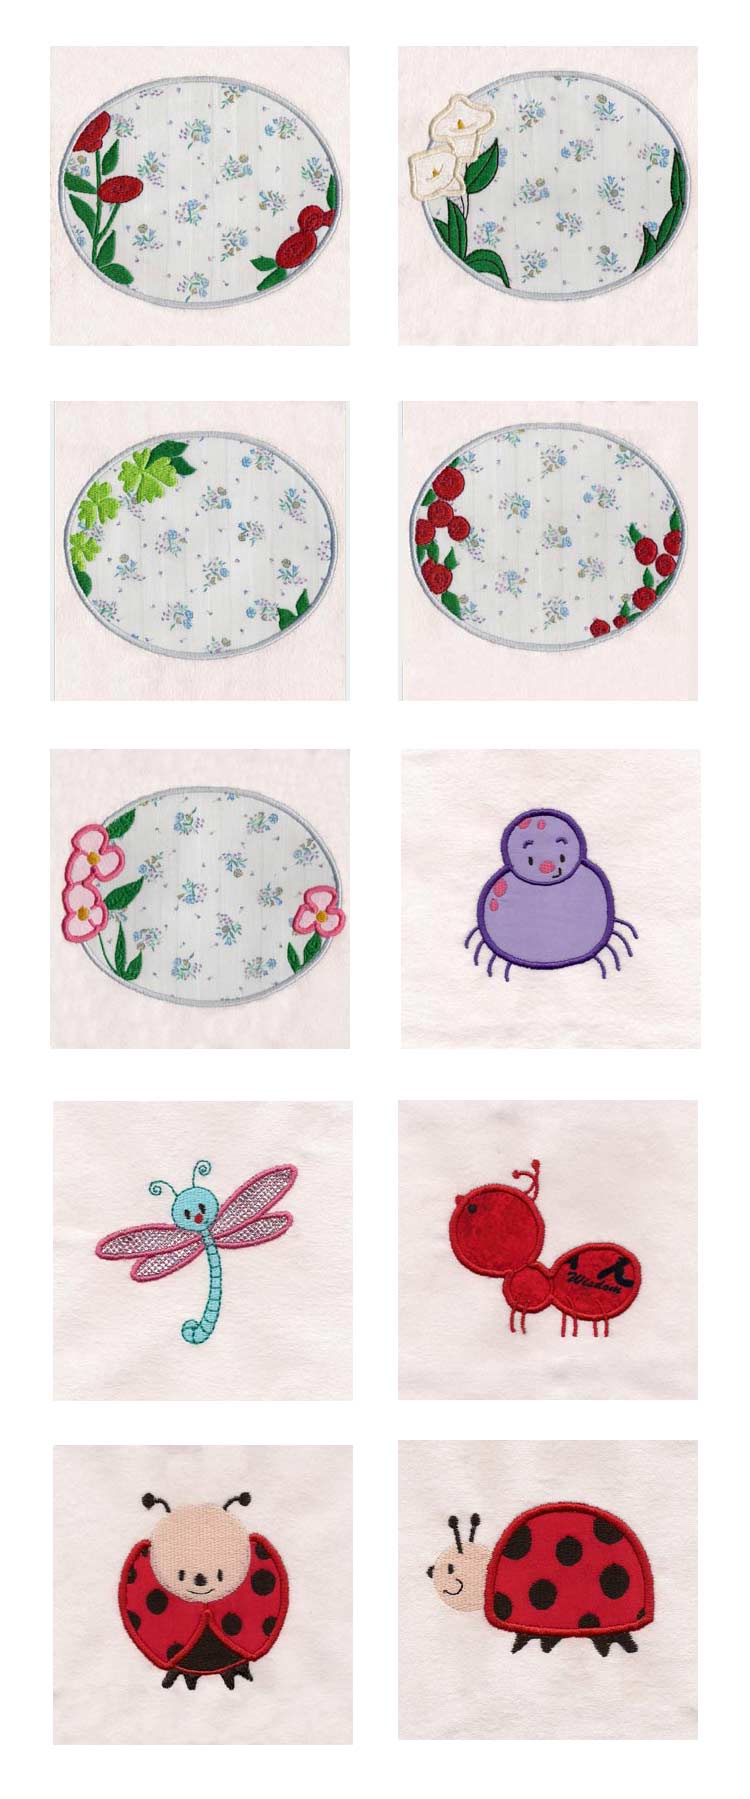 Spring Time Scenes Embroidery Machine Design Details